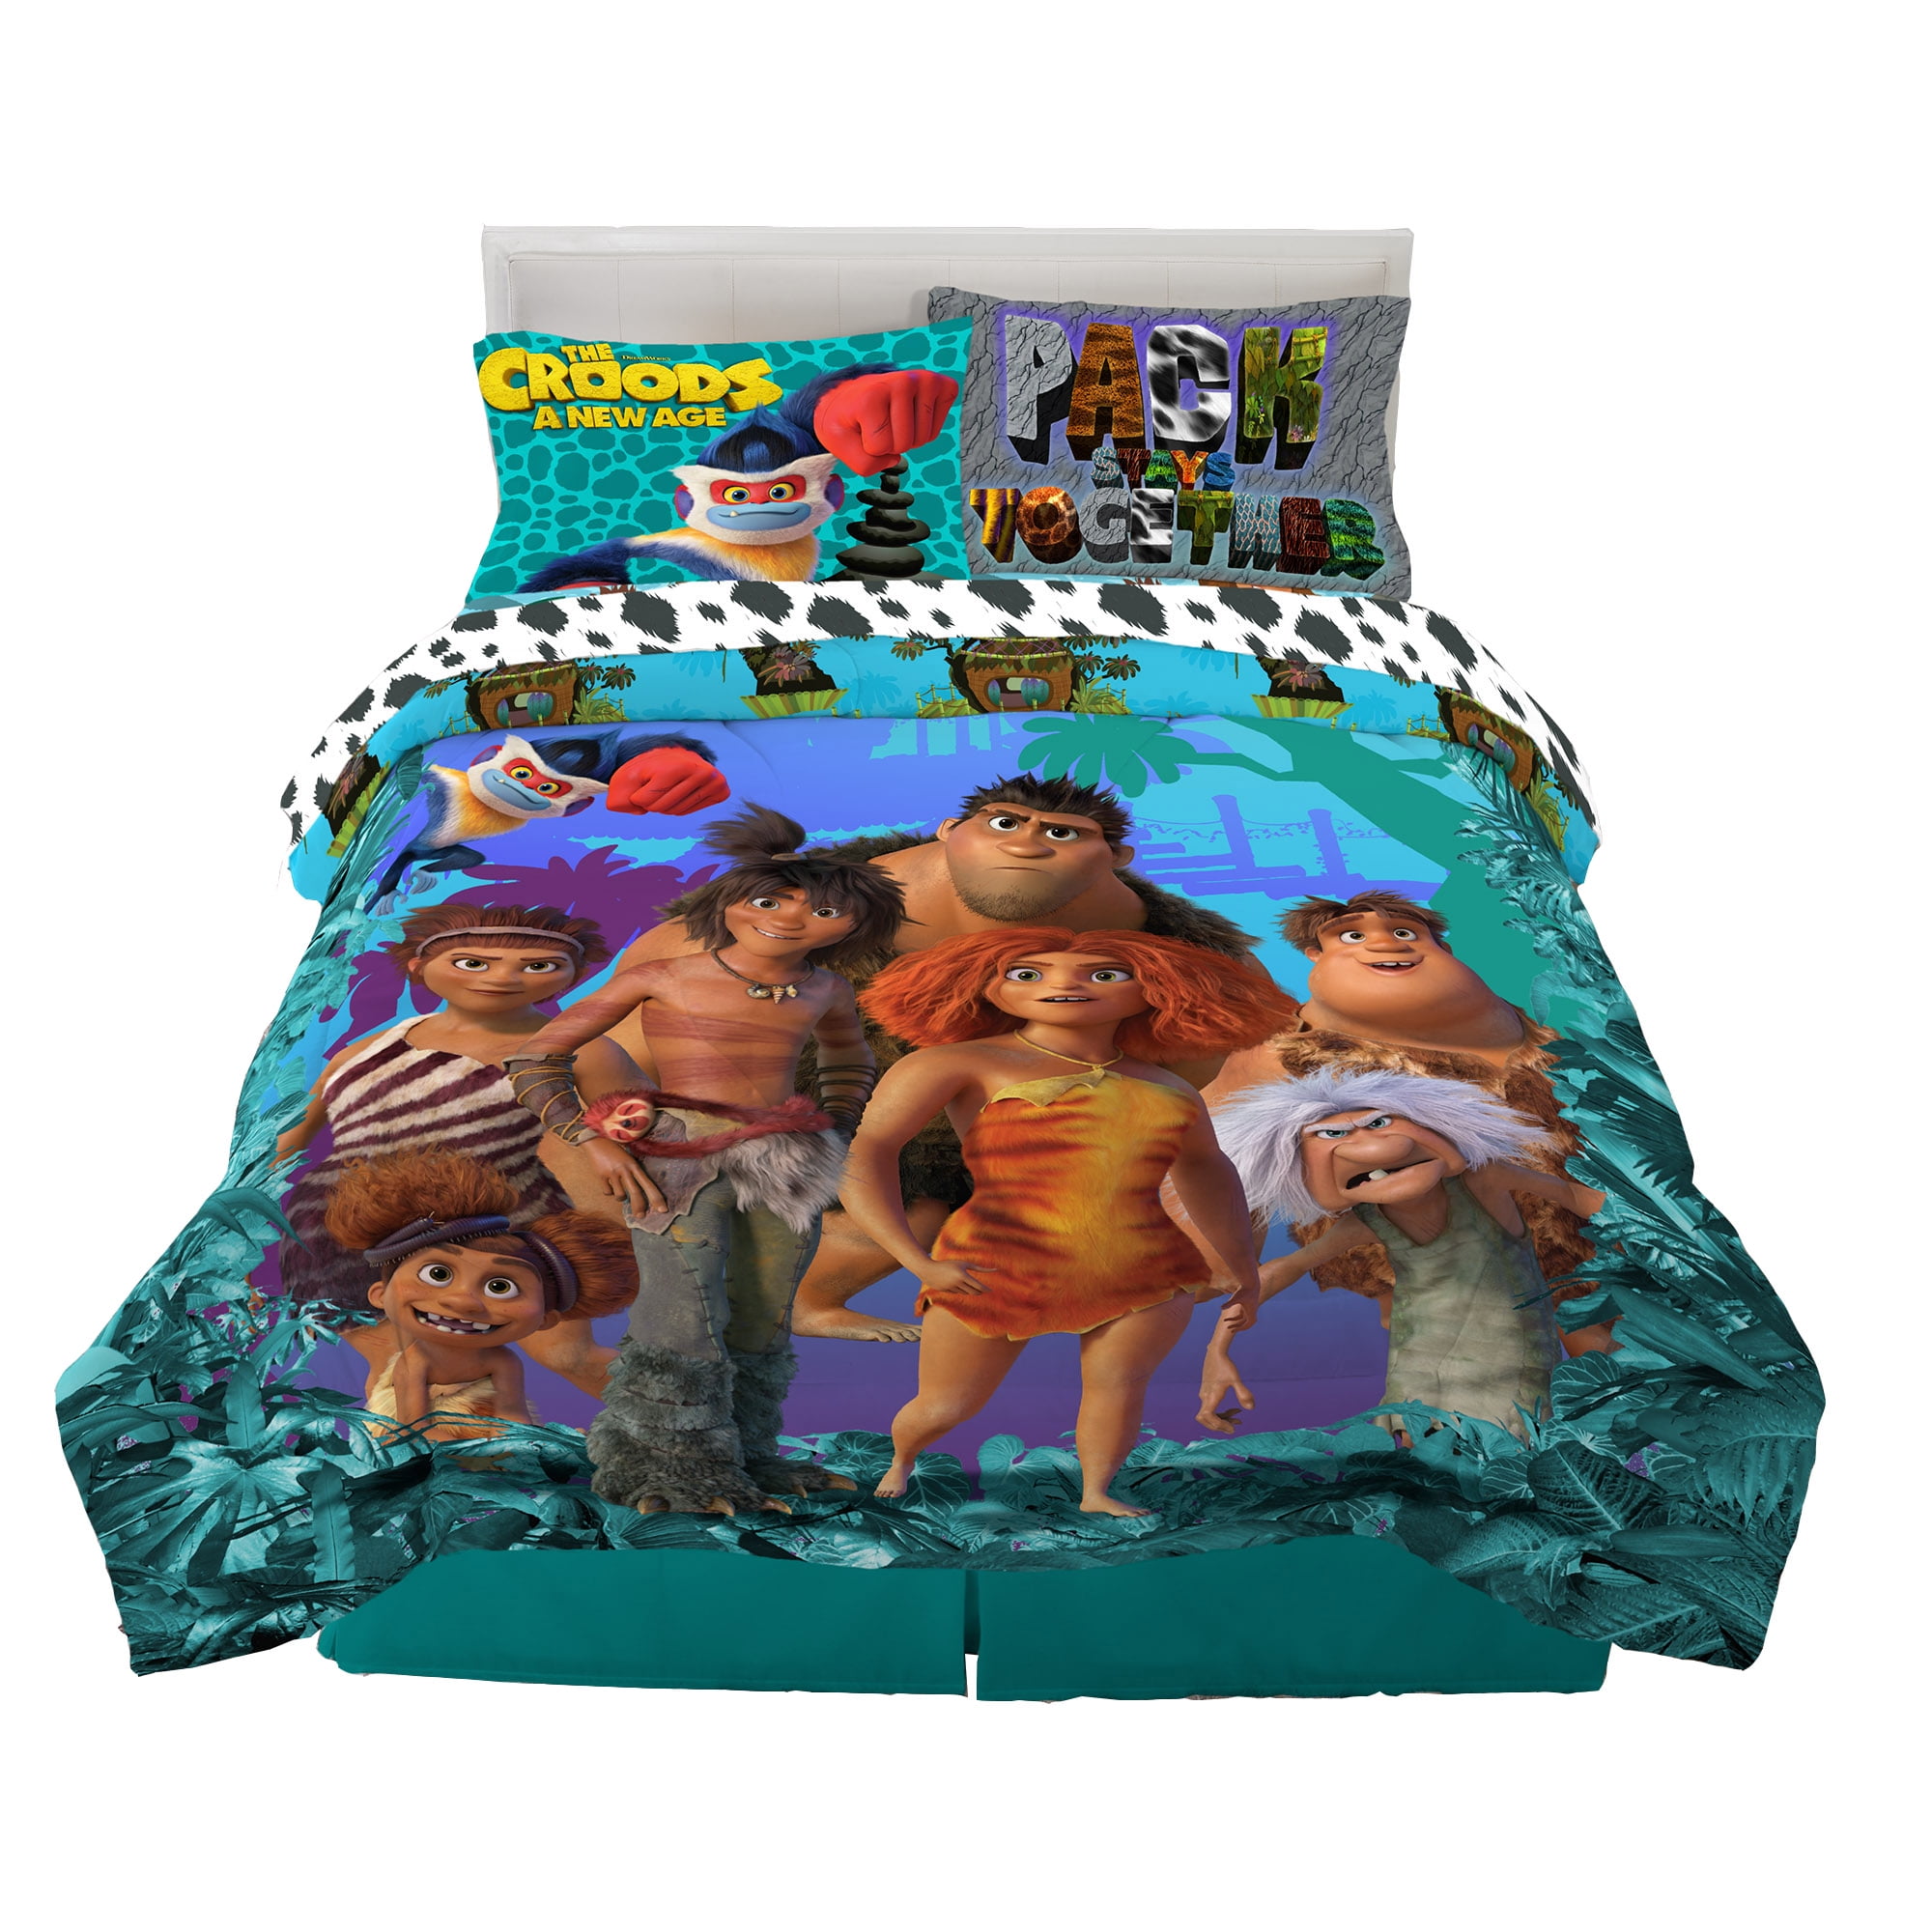 Galaxy Basketball, Full Meeting Story Basketball With Fire Print Duvet Cover Bedding Set For Kids